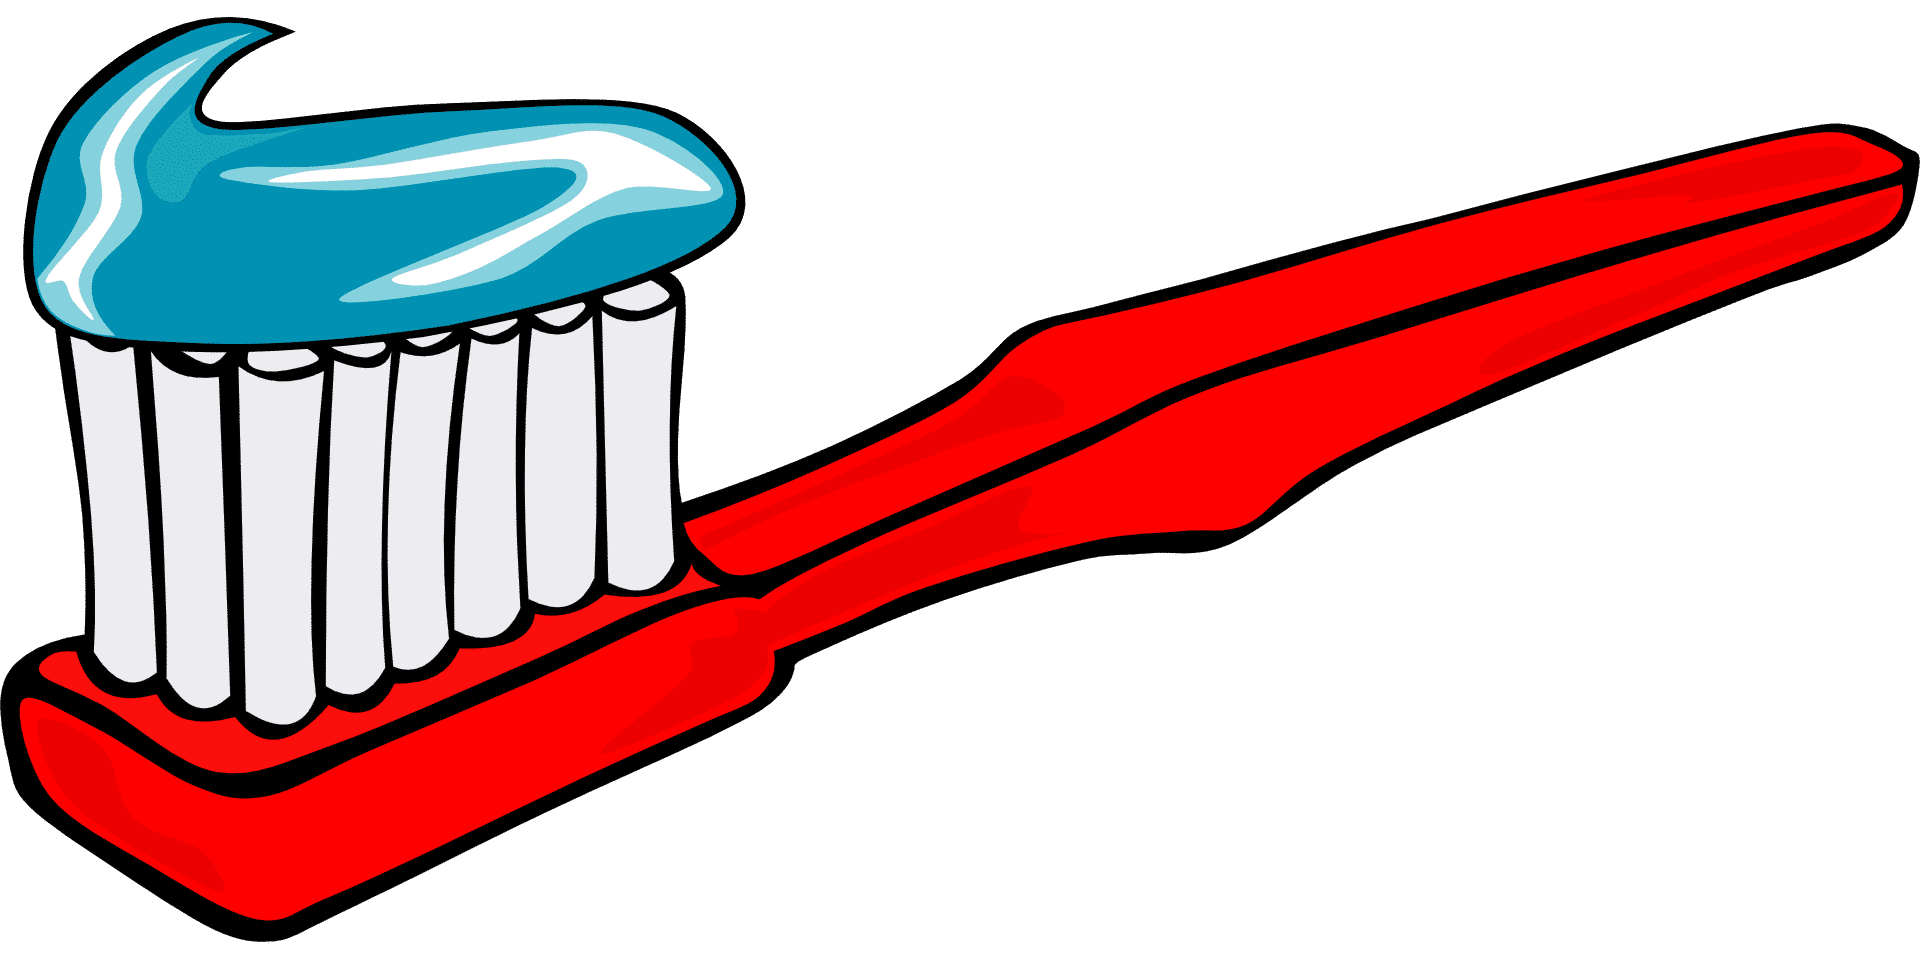  how to get rid of cavities toothbrush, toothpaste, hygiene